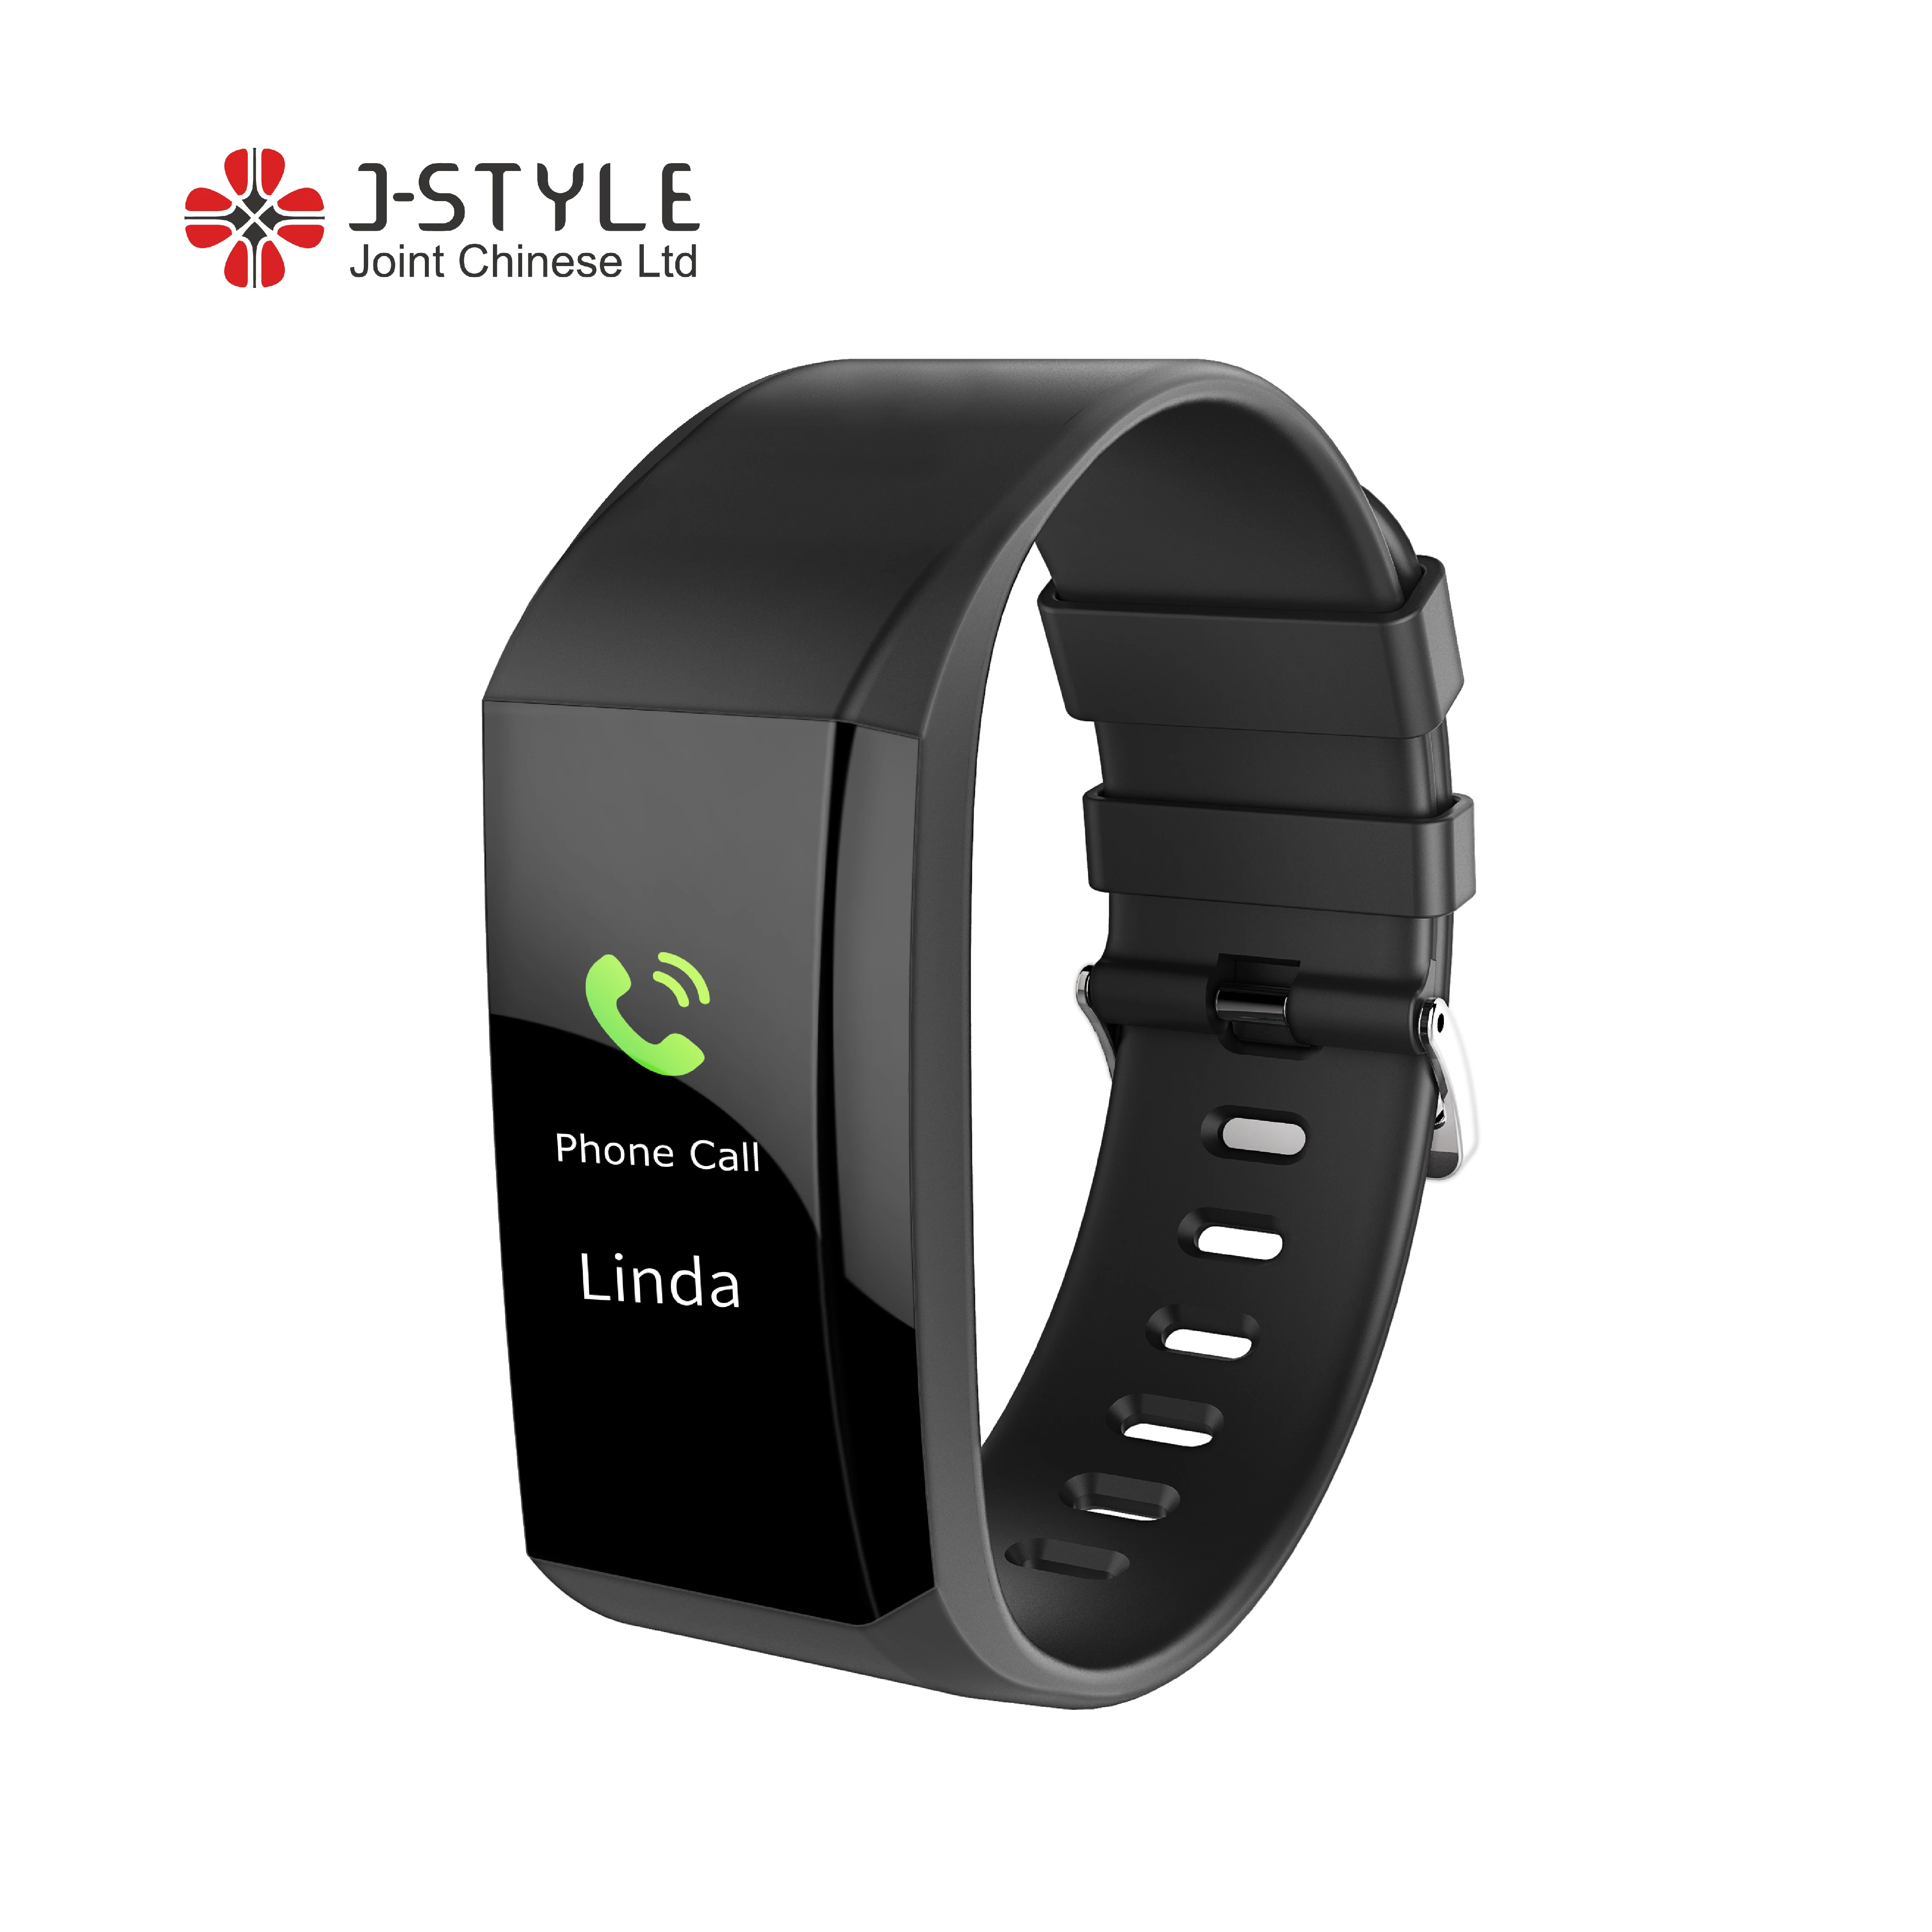 

J-Style 1755 Innovative GPS Sports Fitness Tracker Watch Monitoring 24H Real Time Heart Rate, HRV, Stress, Sleep, Smart Alarms, Black, red, slate, or oem color